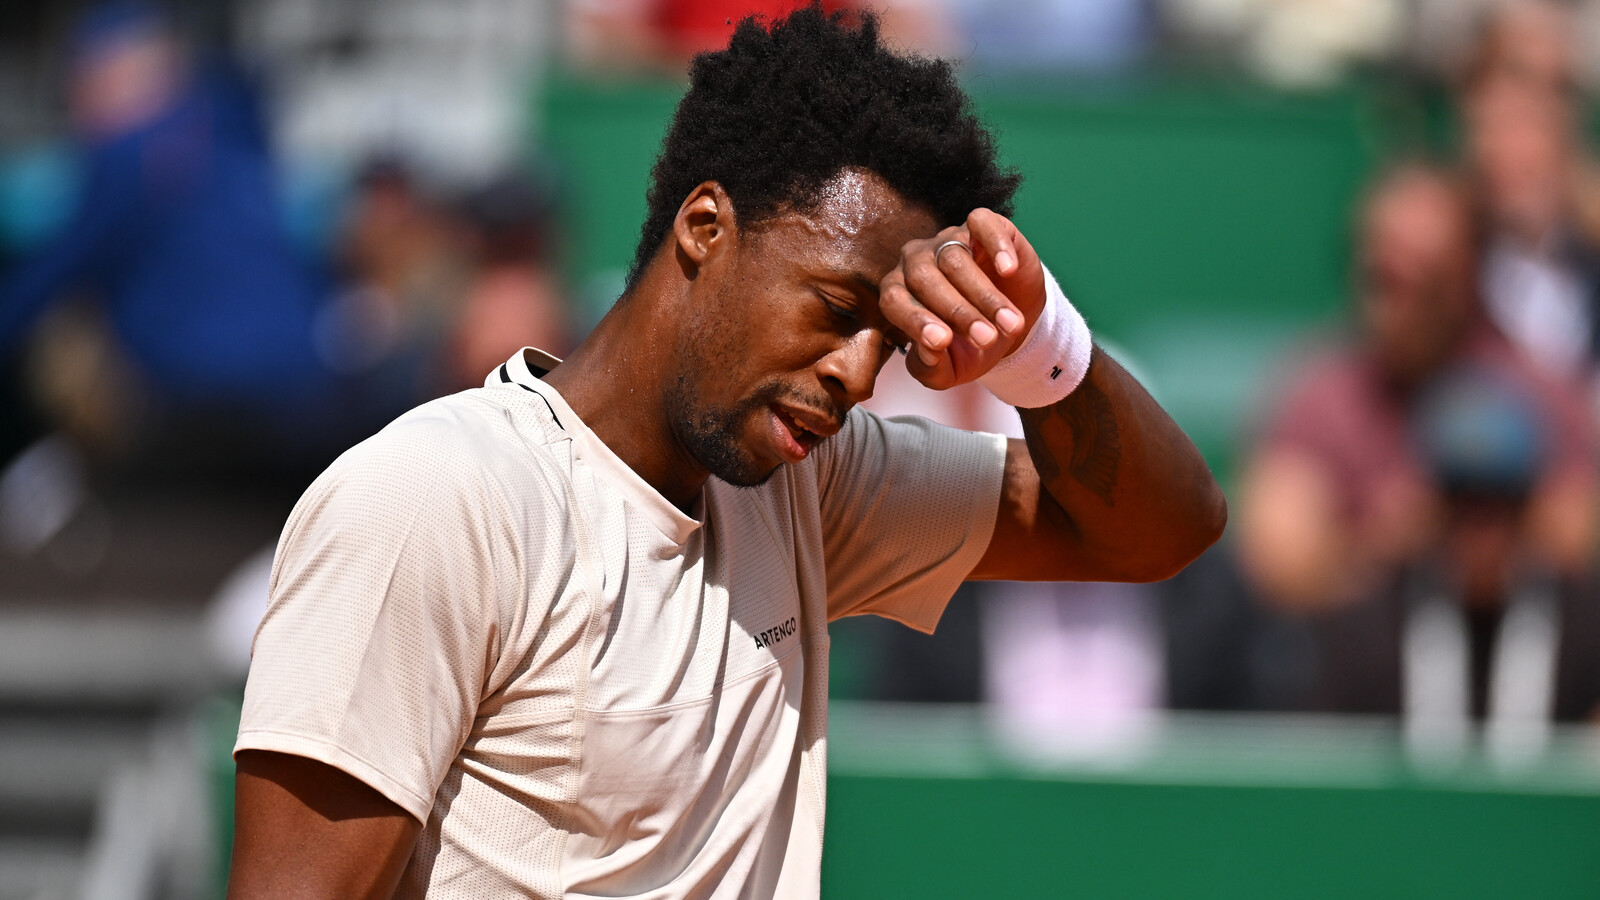 'Every decision is a sacrifice:' Gael Monfils makes sad confession on missing out on moments in daughter’s life